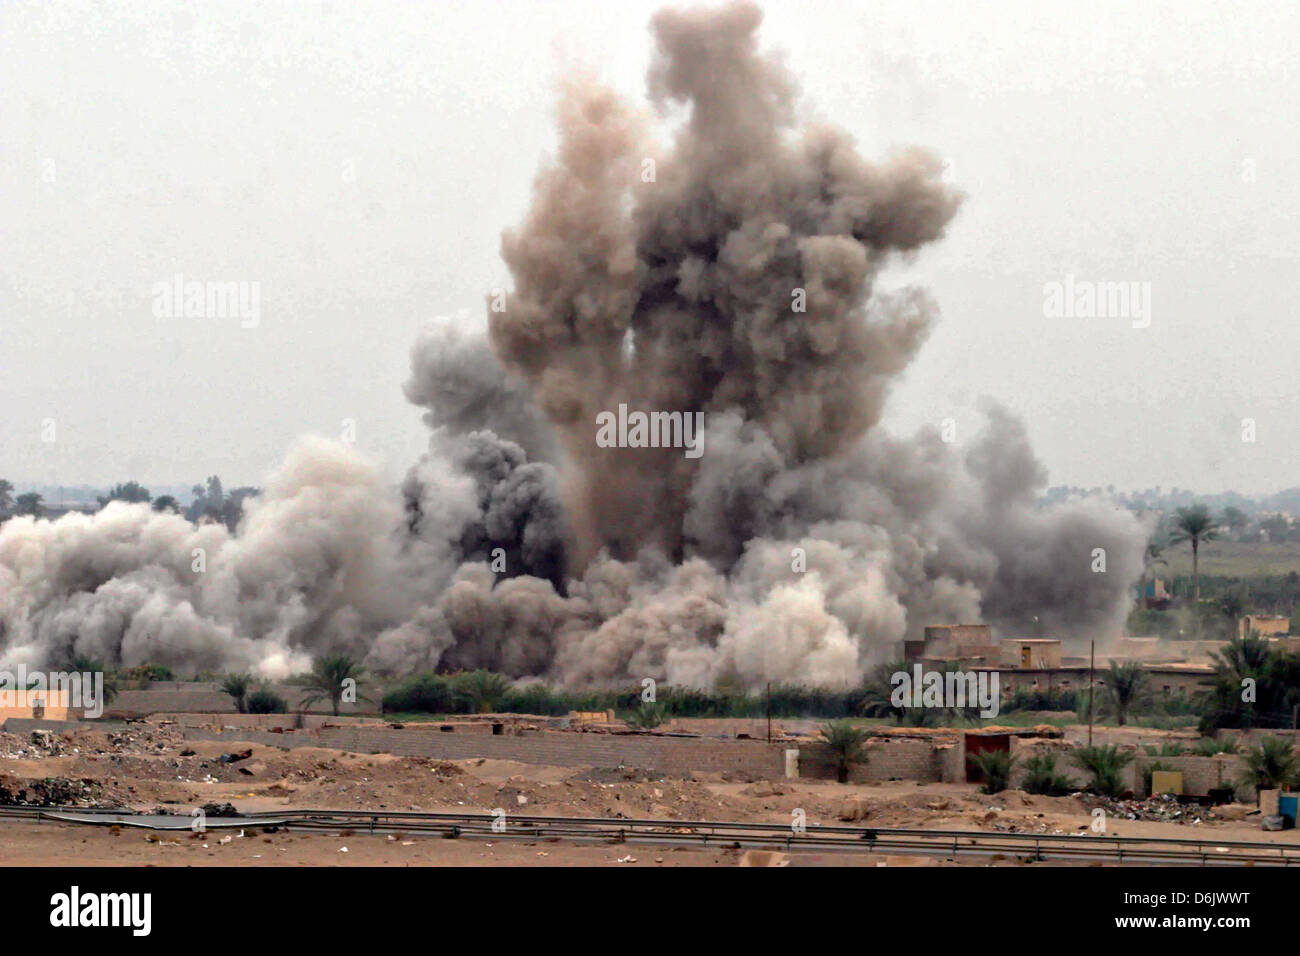 A US military air strike hits a suspected insurgent hideout during an assault by US Marines November 8, 2004 at the edge of Fallujah, Iraq. Stock Photo